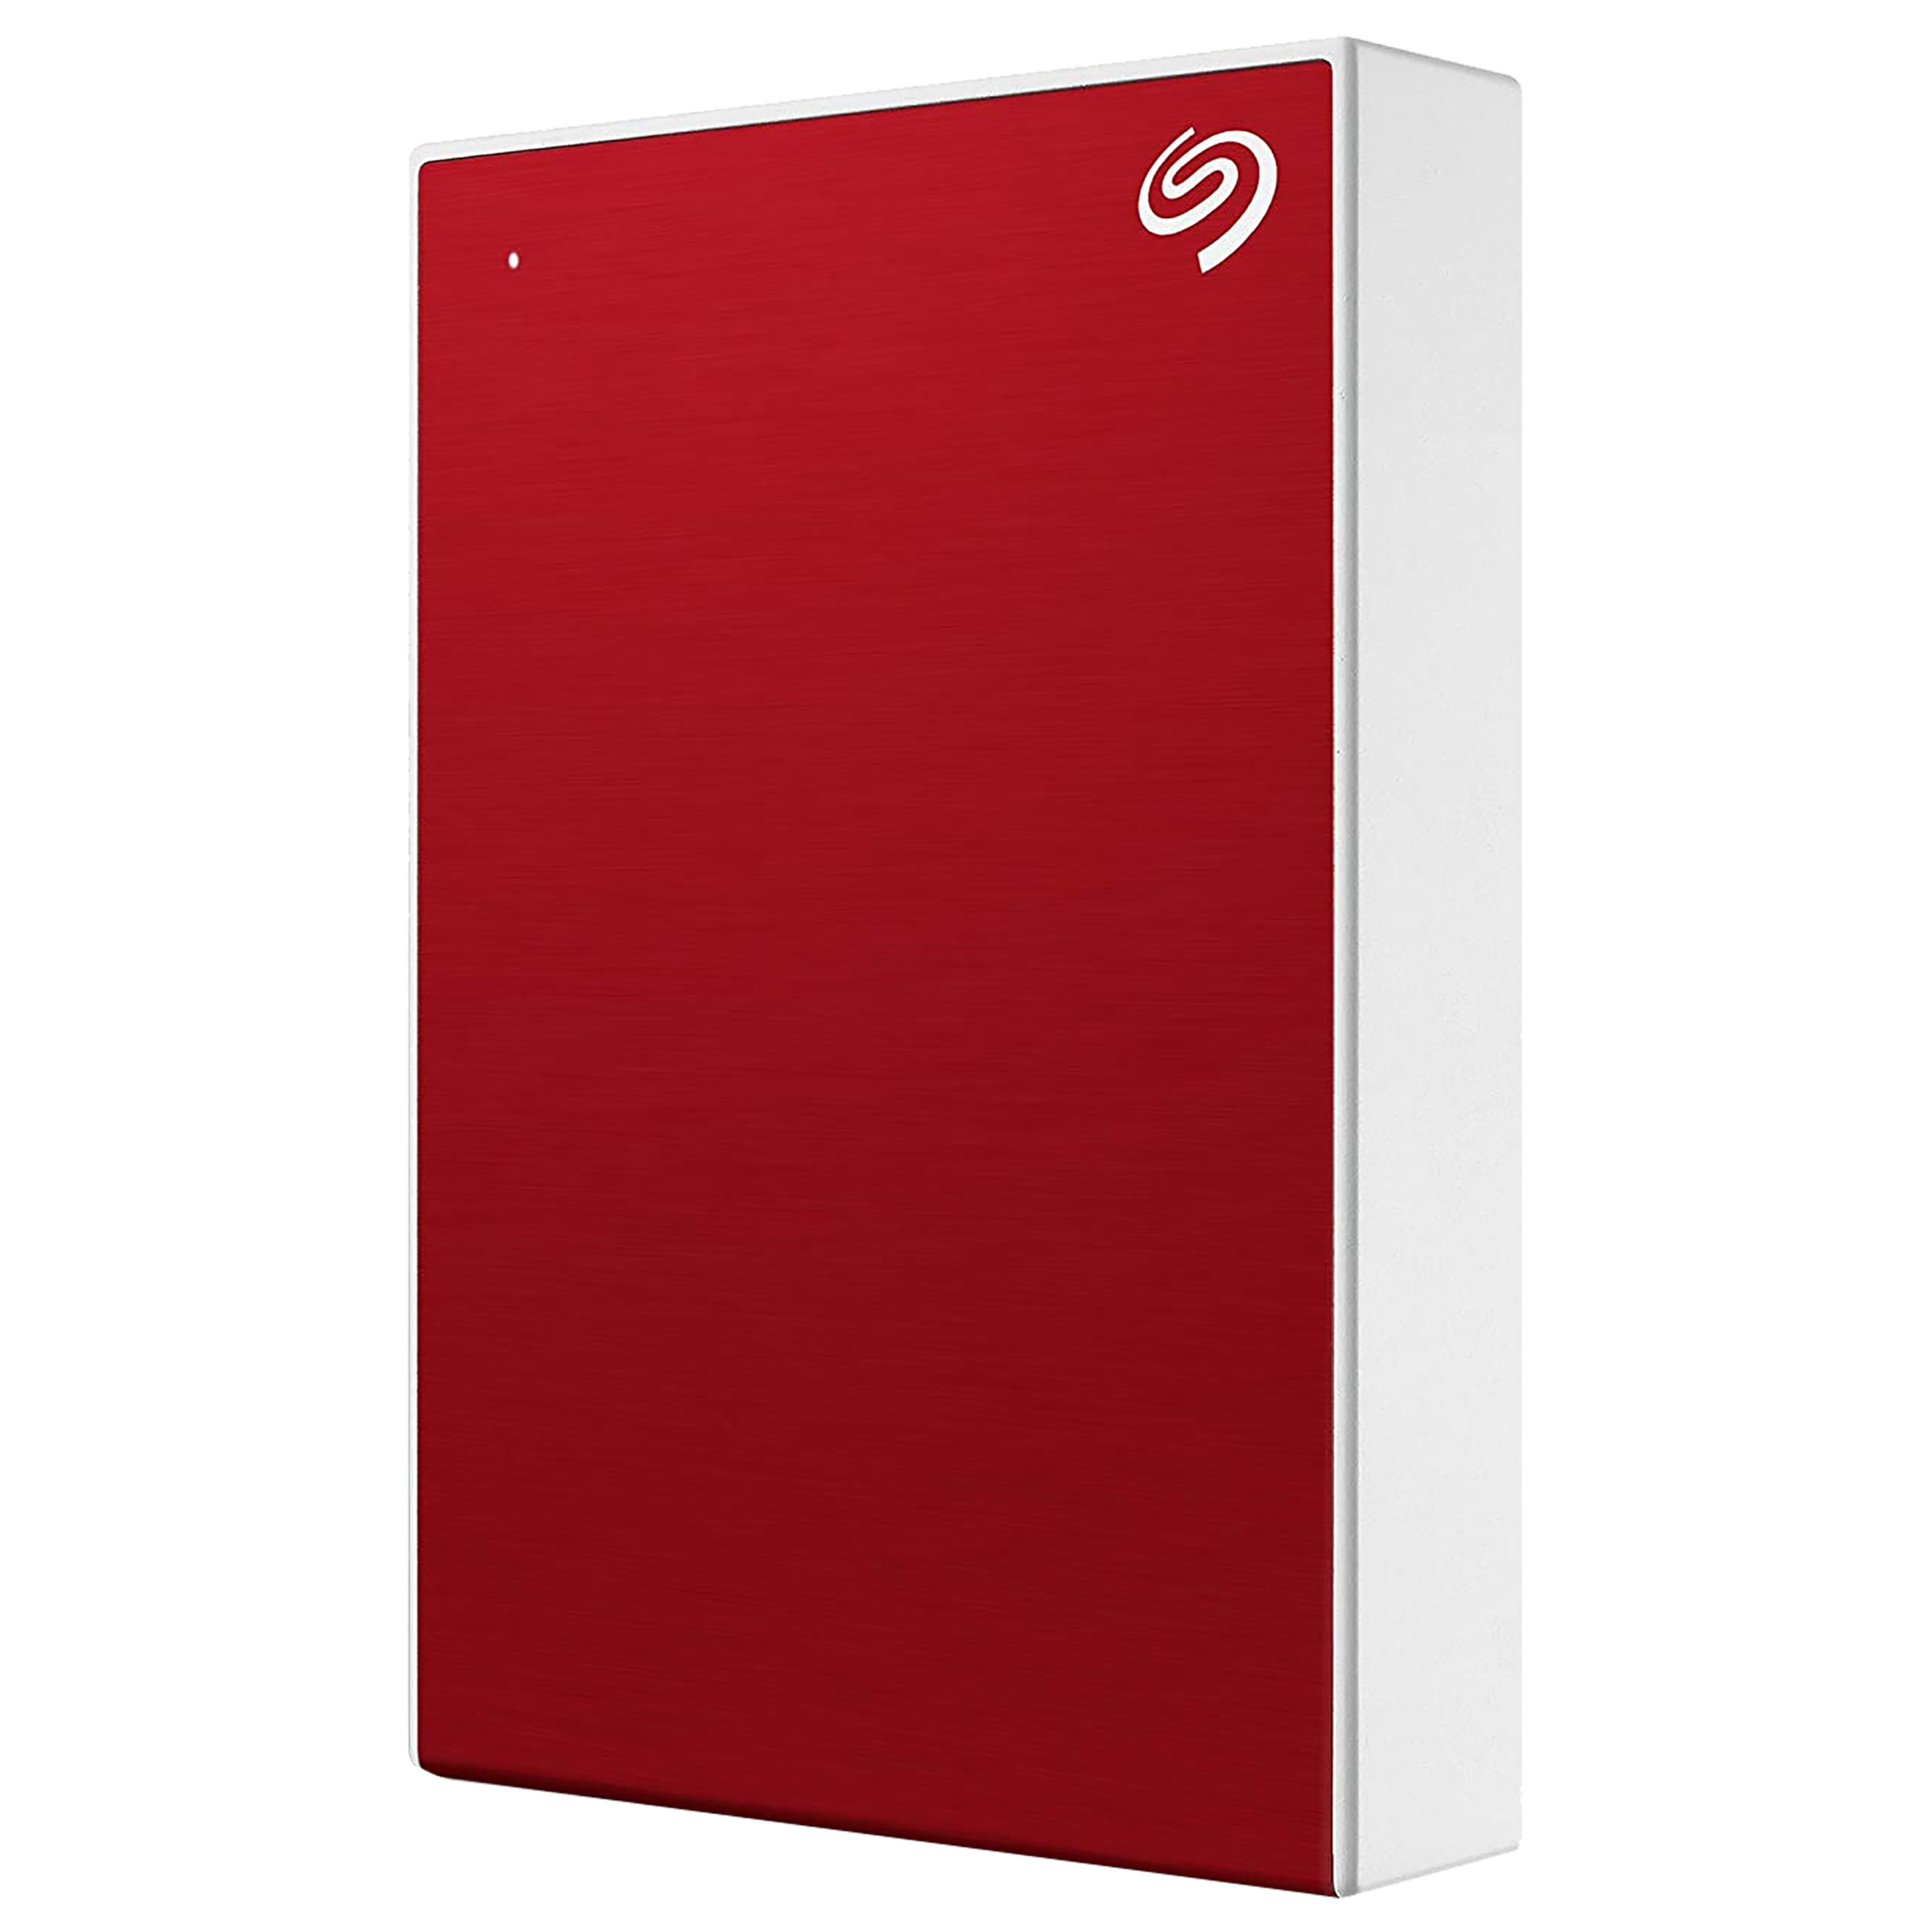 Seagate One Touch 5TB USB 3.0 Hard Disk Drive (Universal Compatibility, STKZ5000403, Red)_1